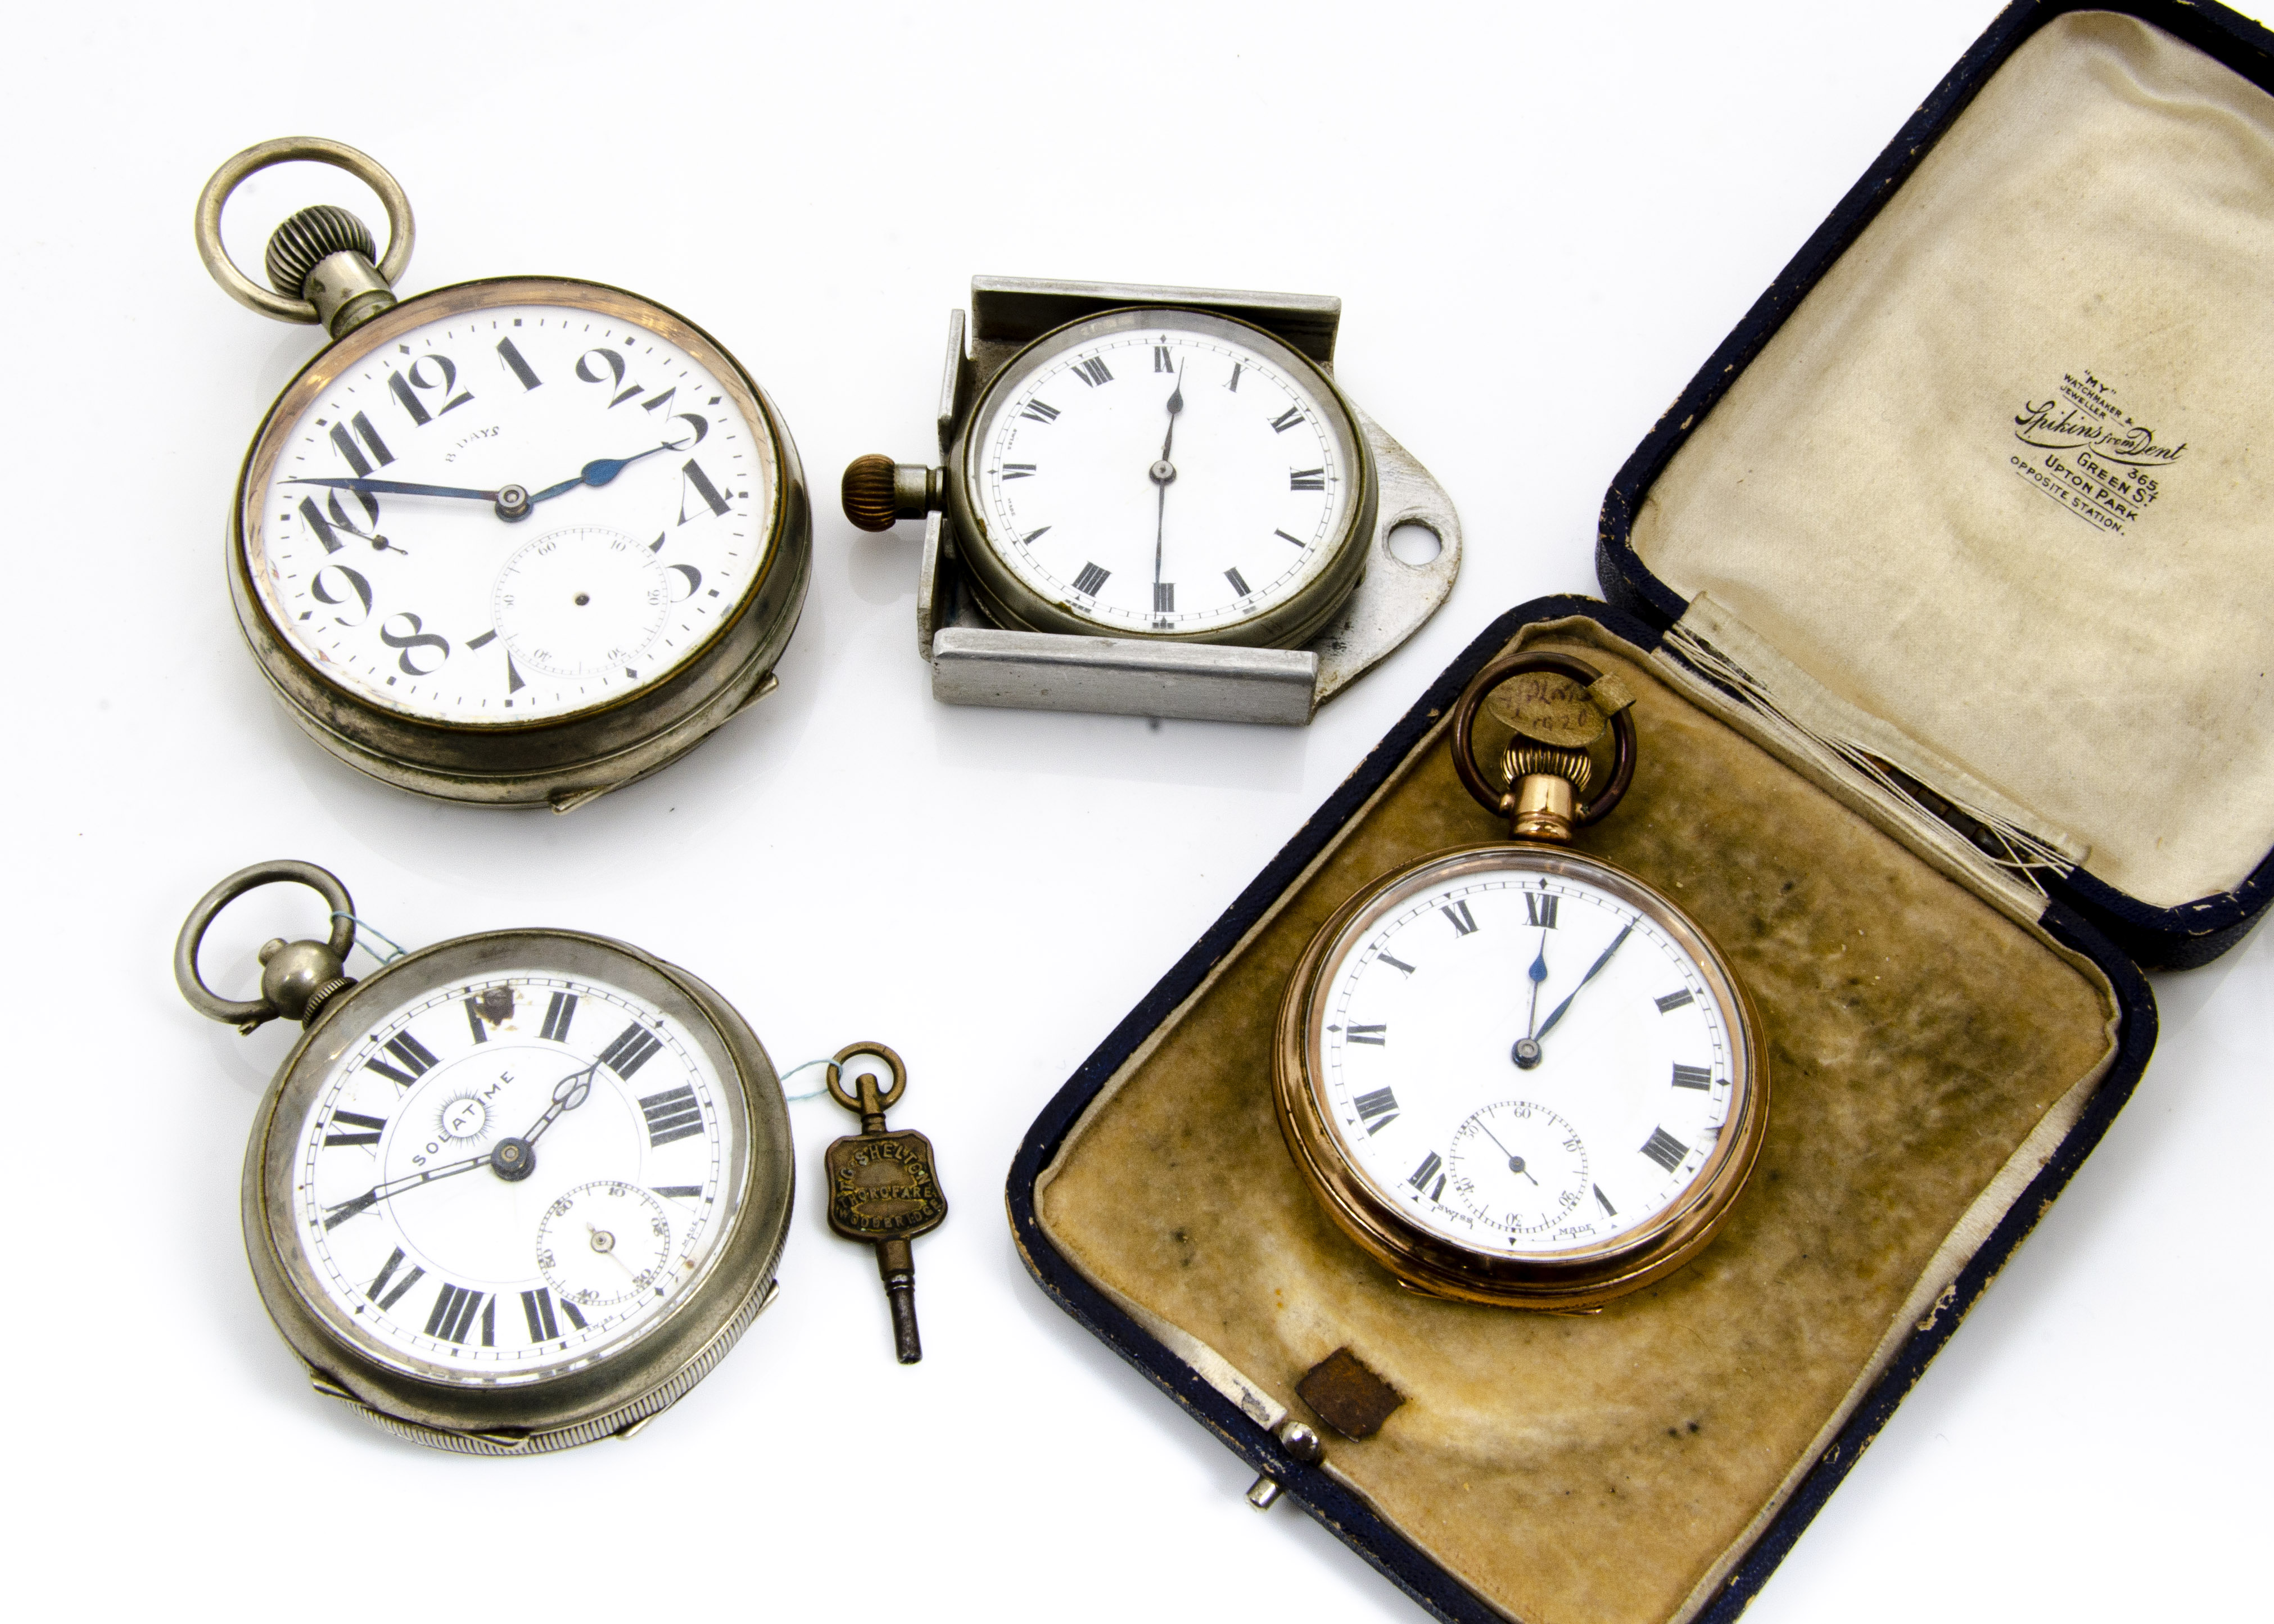 A gold plated open faced pocket watch, in box, together with a Goliath open faced pocket watch and